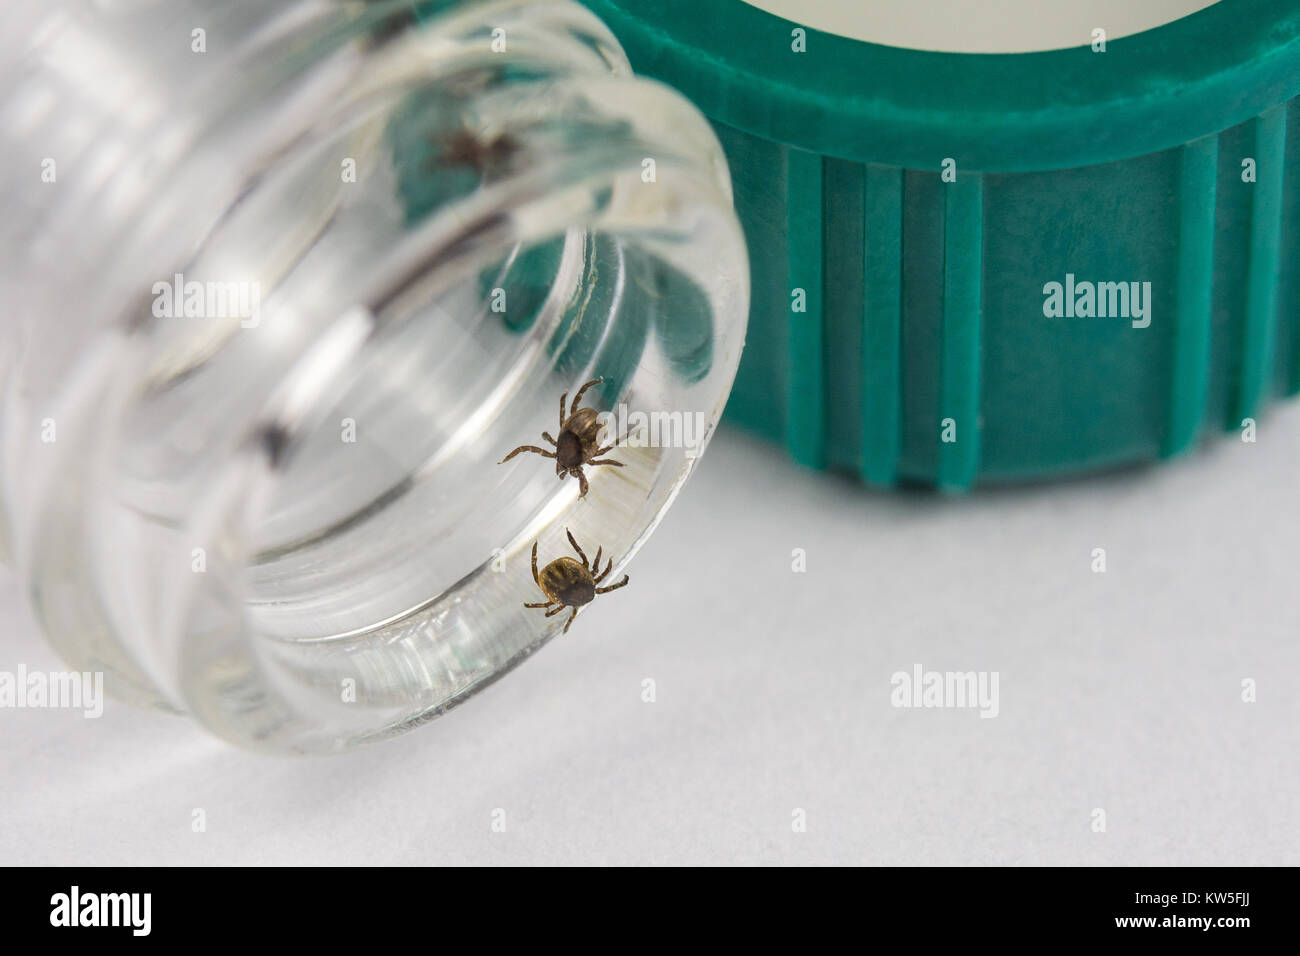 Ticks on vial. The castor bean tick. Ixodes ricinus. Close-up of dangerous insects in test tube. Carriers of infection. Laboratory testing. Stock Photo